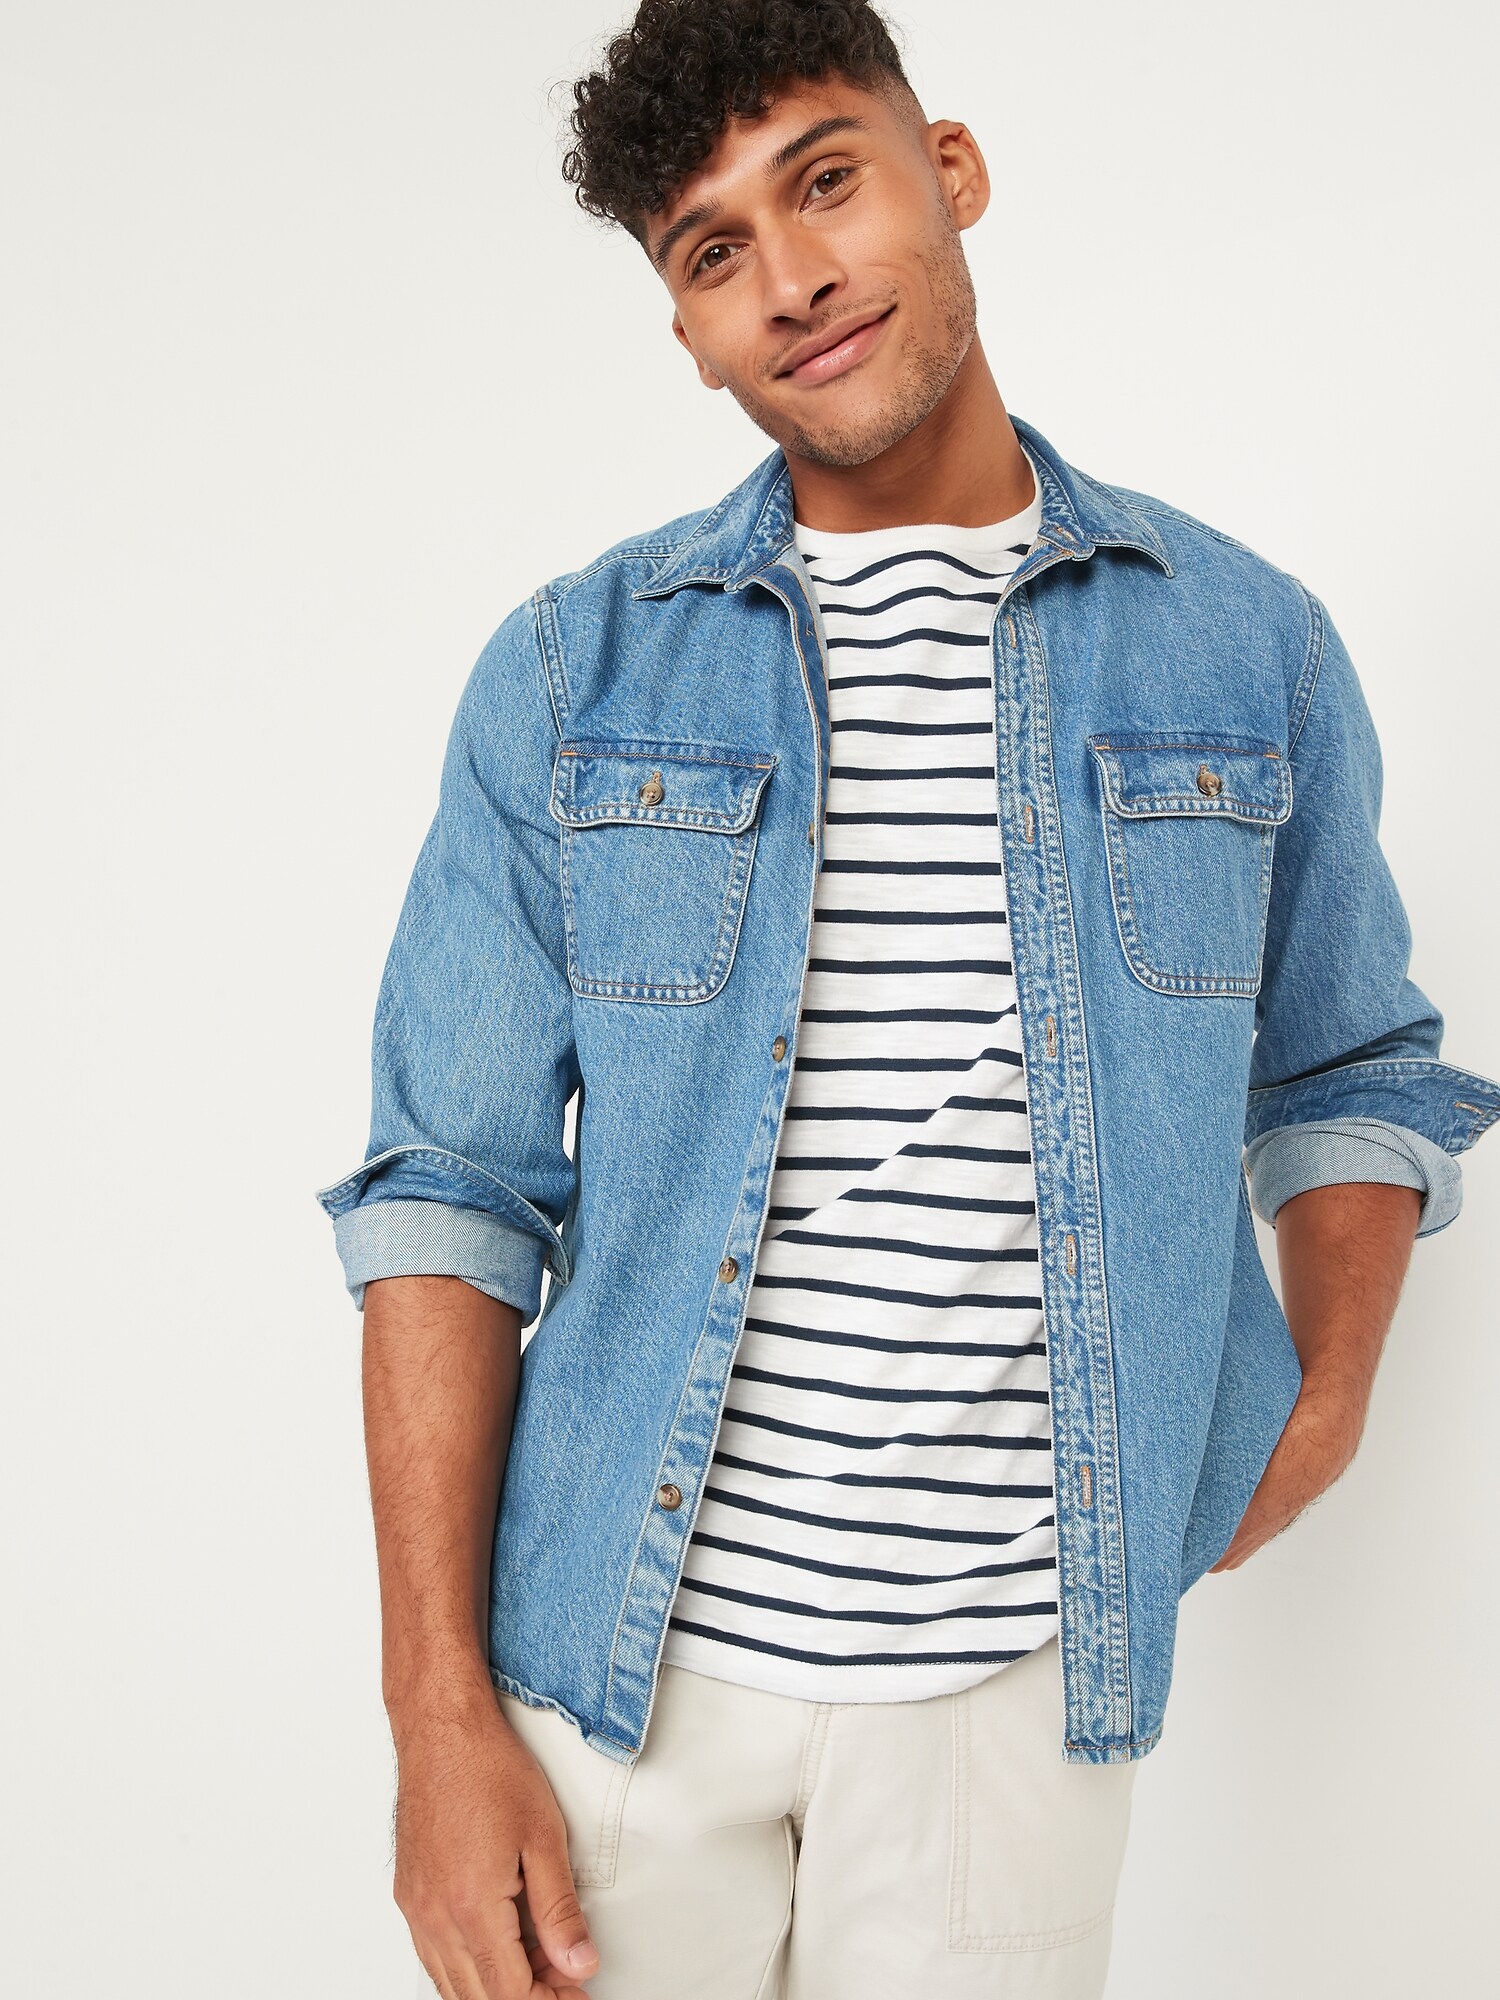 Gender-Neutral Long-Sleeve Jean Workwear Shirt for Adults | Old Navy